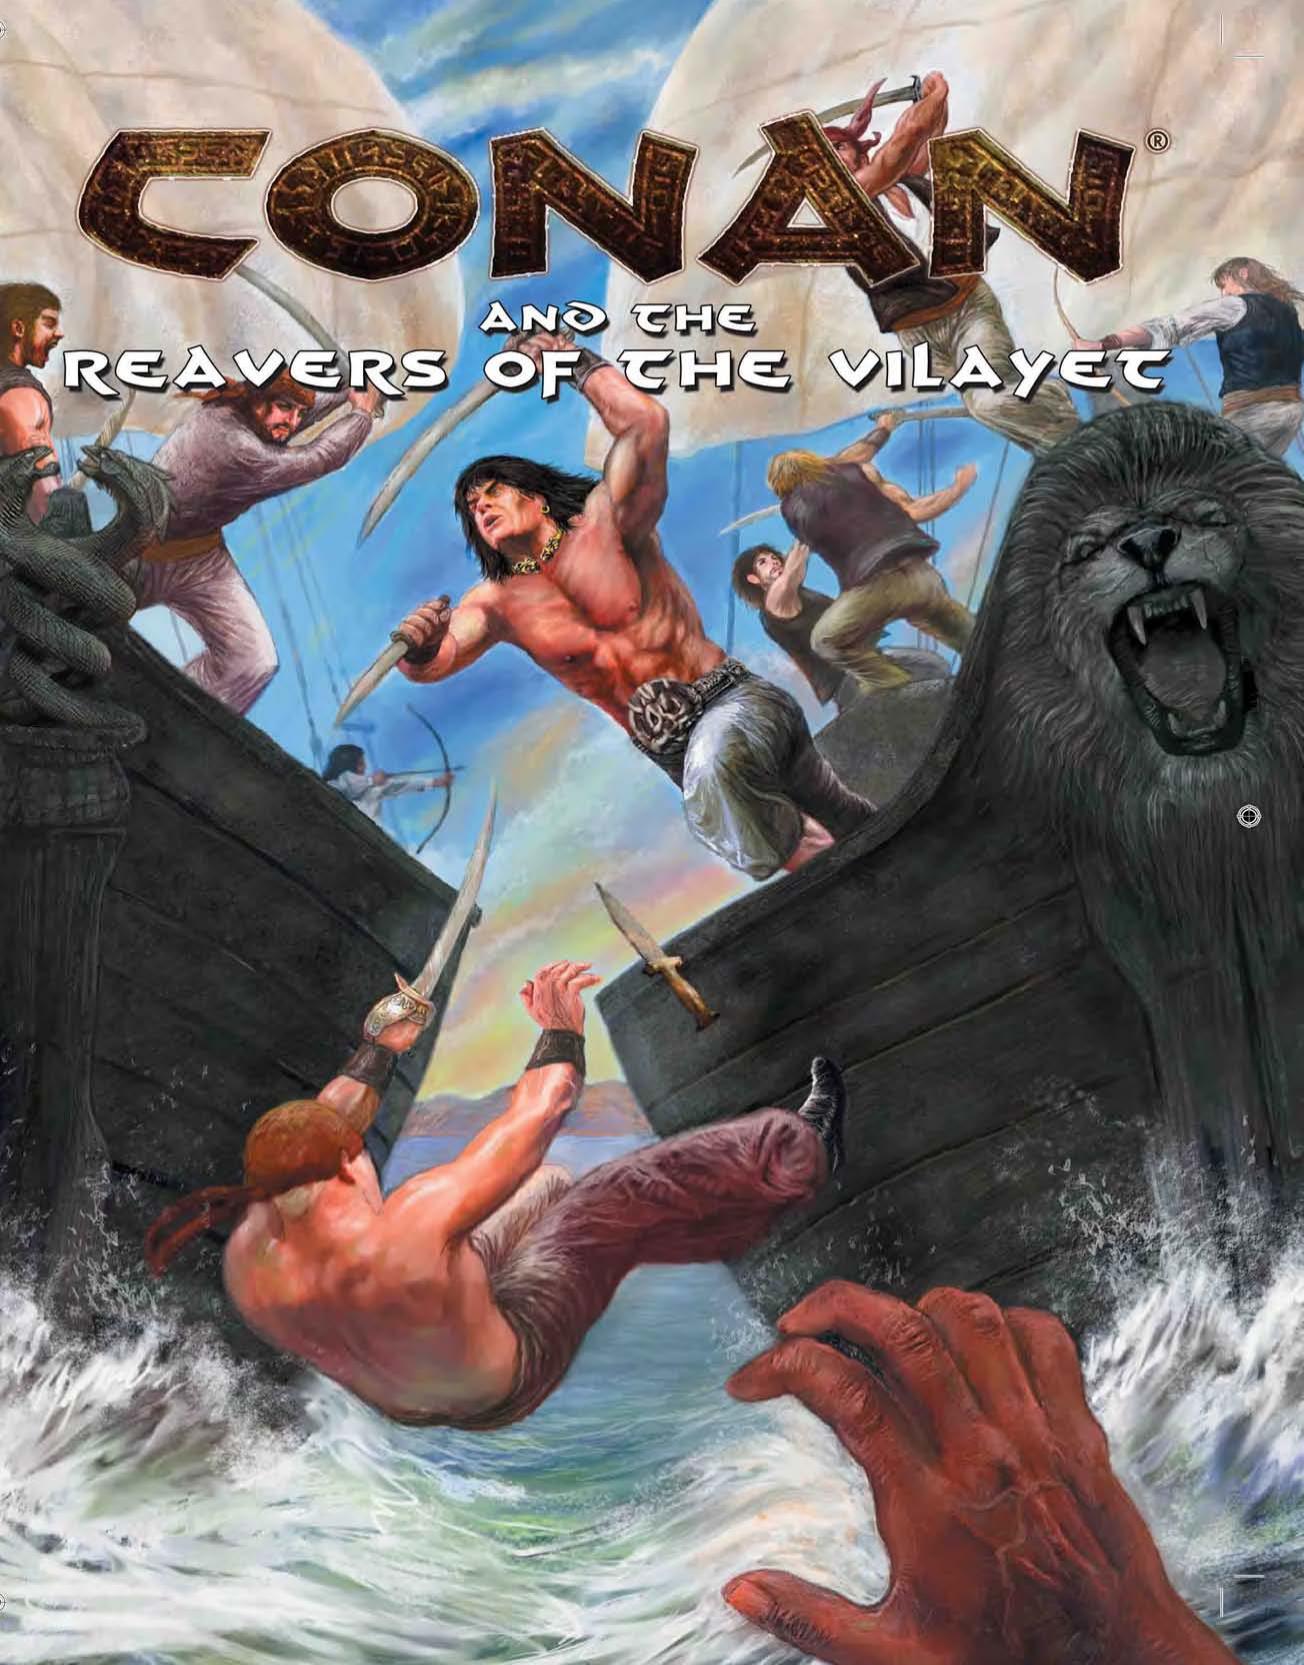 Conan D20 1e Conan and the Reavers of the Vilayet